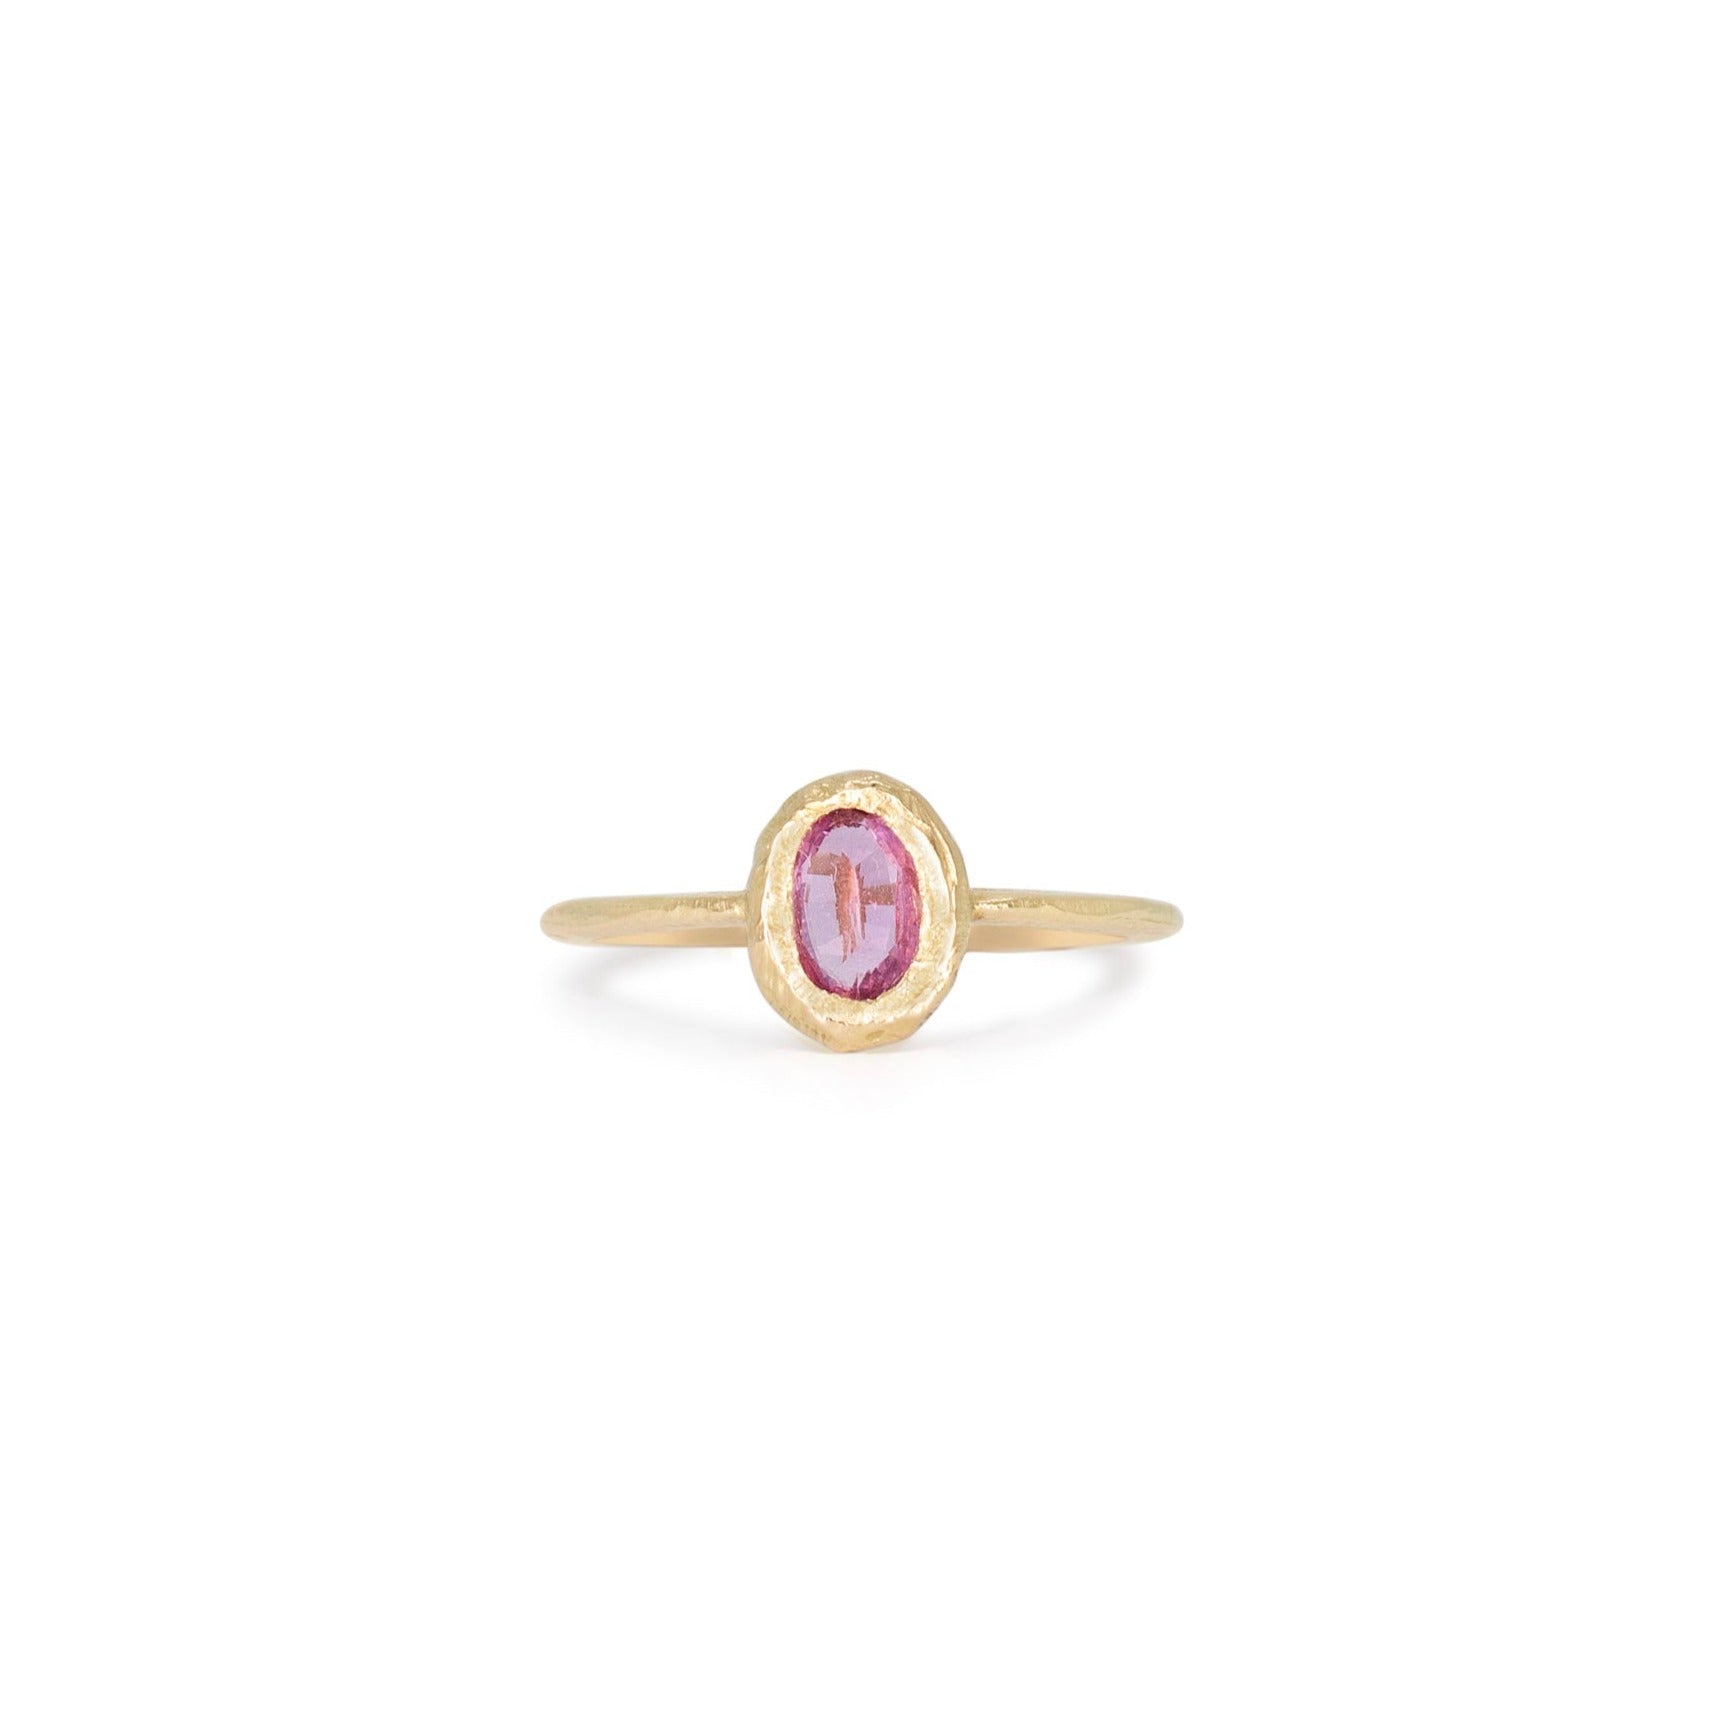 18K Oval Stone Ring in Pink Sapphire Rings Page Sargisson Stone Vertical 4 